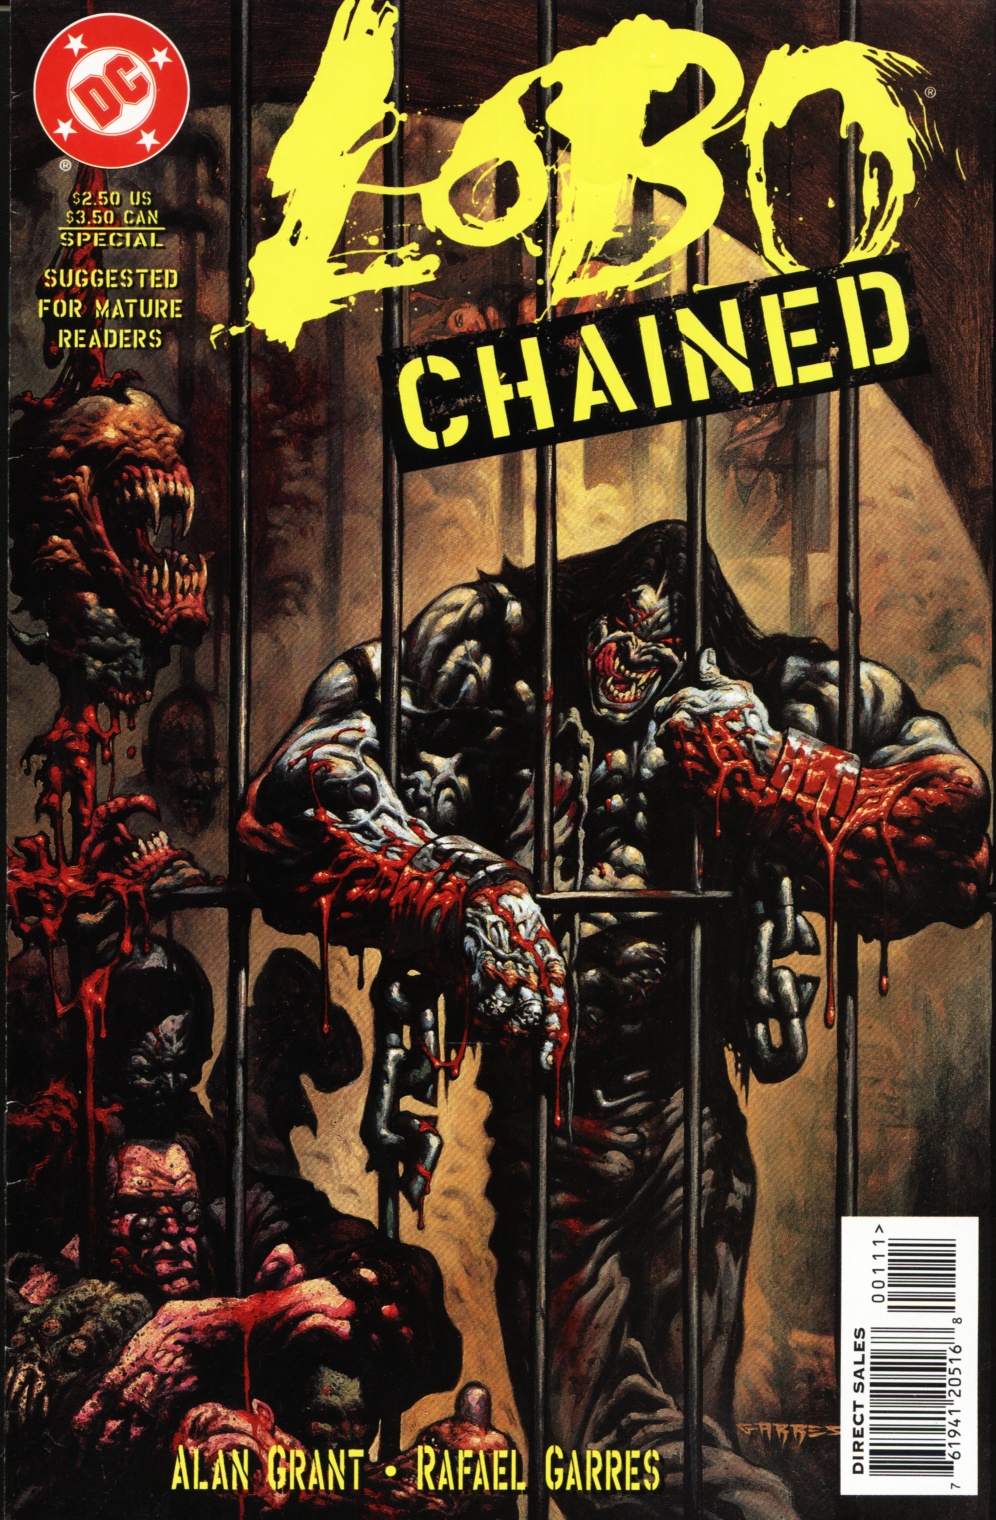 Read online Lobo: Chained comic -  Issue # Full - 1